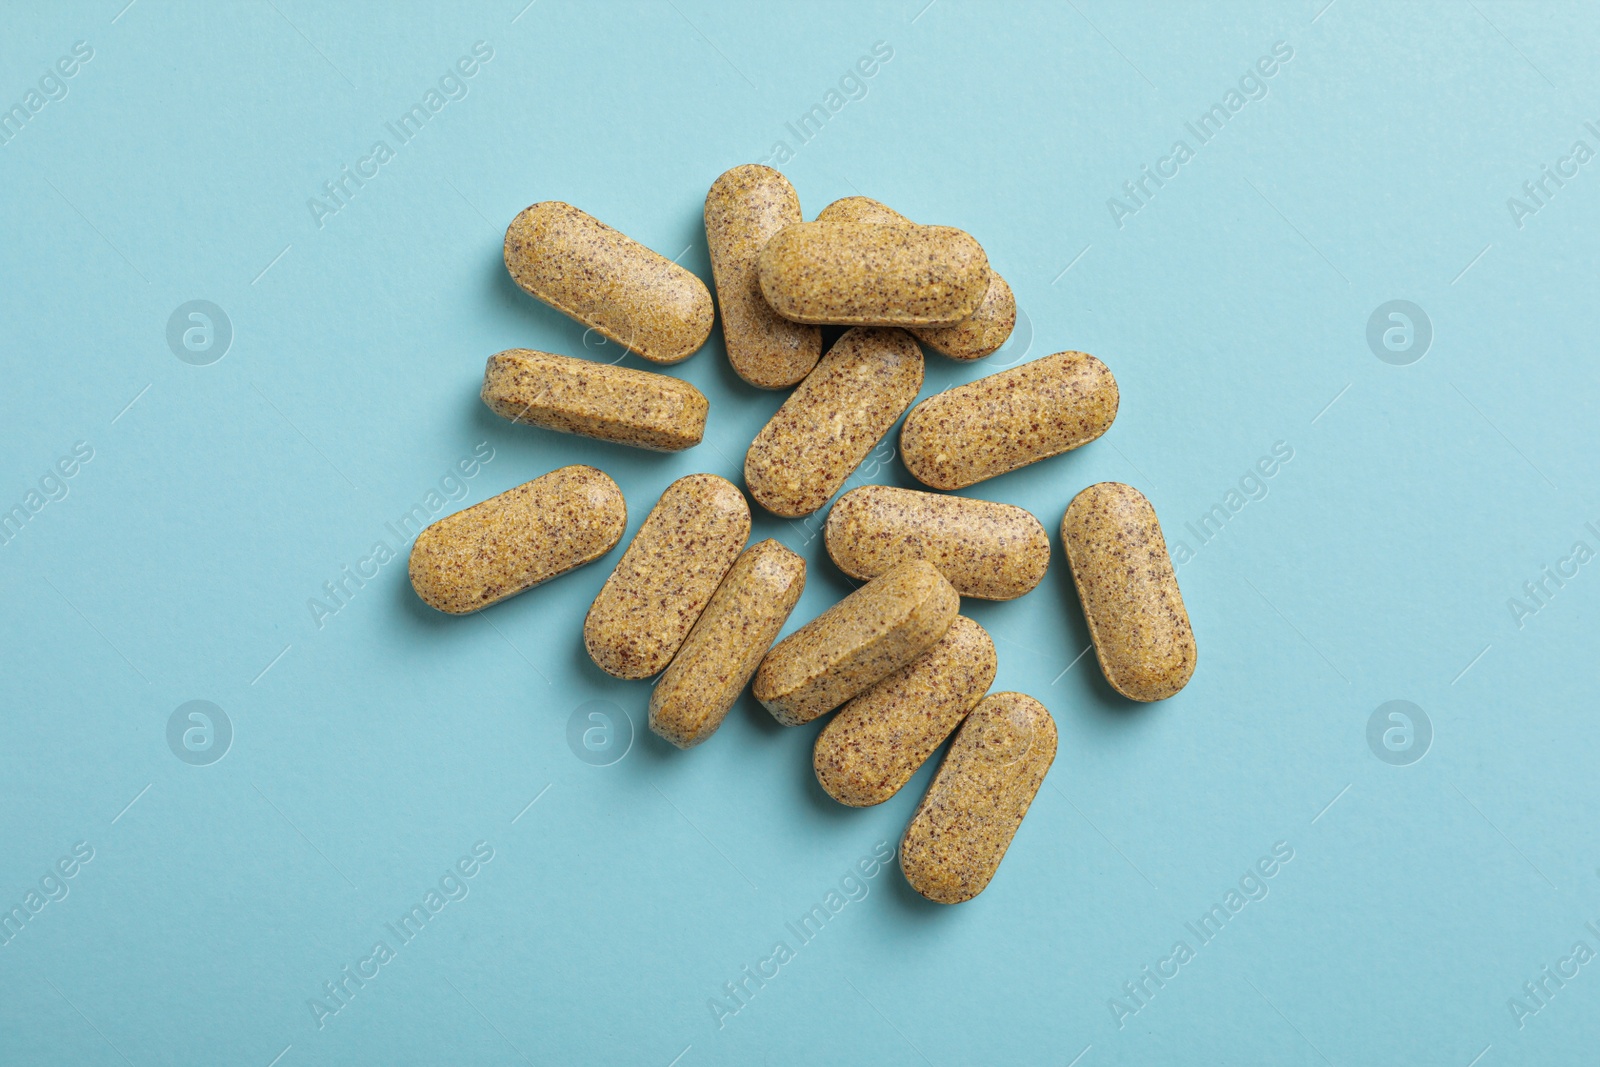 Photo of Dietary supplement pills on light blue background, flat lay